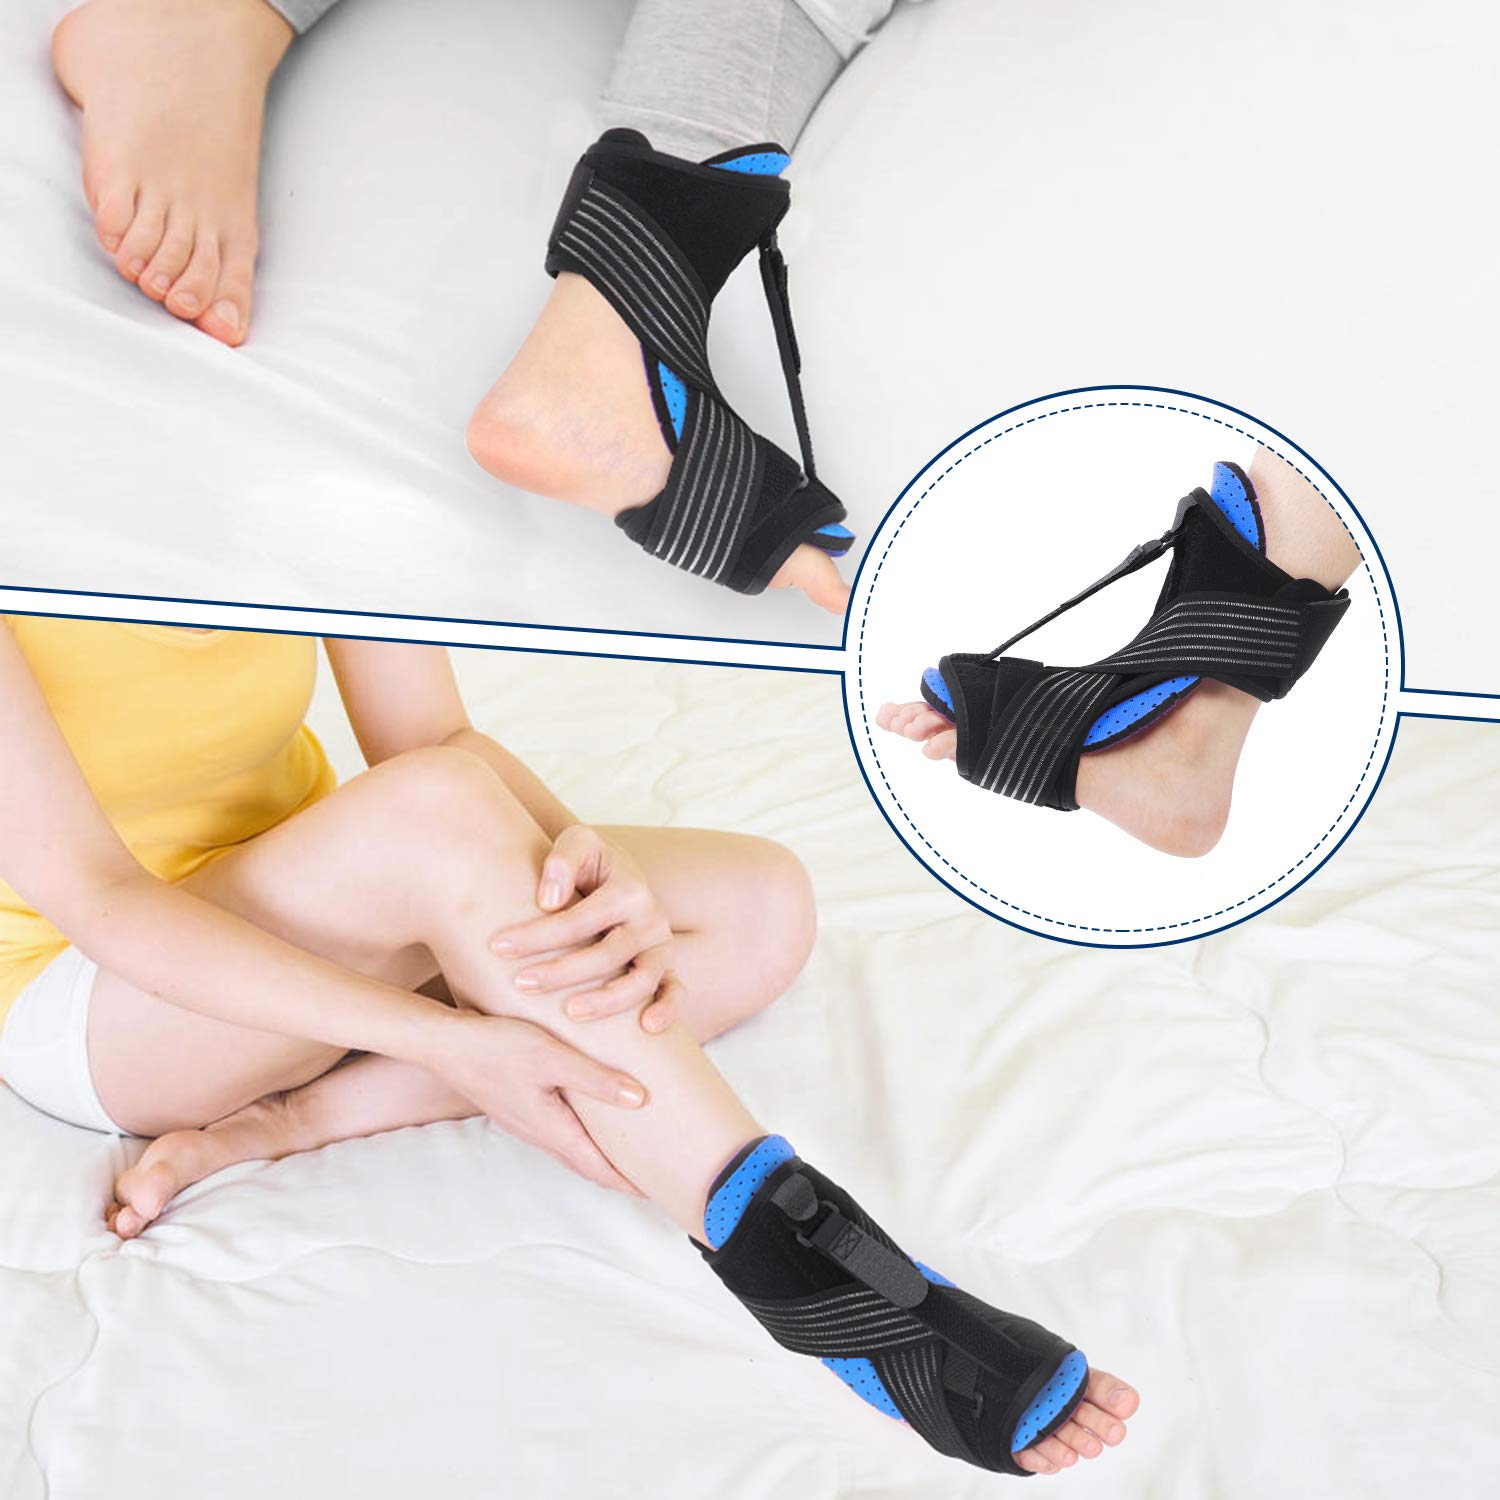 Buy Plantar Fasciitis Day Ankle Brace | Daytime Splint with Heel Strap That  Fits in Shoe for Peroneal Tendonitis Support, Foot Arch Pain Relief, PTTD,  Achilles Tendonitis, and Sprains (Universal) Online at